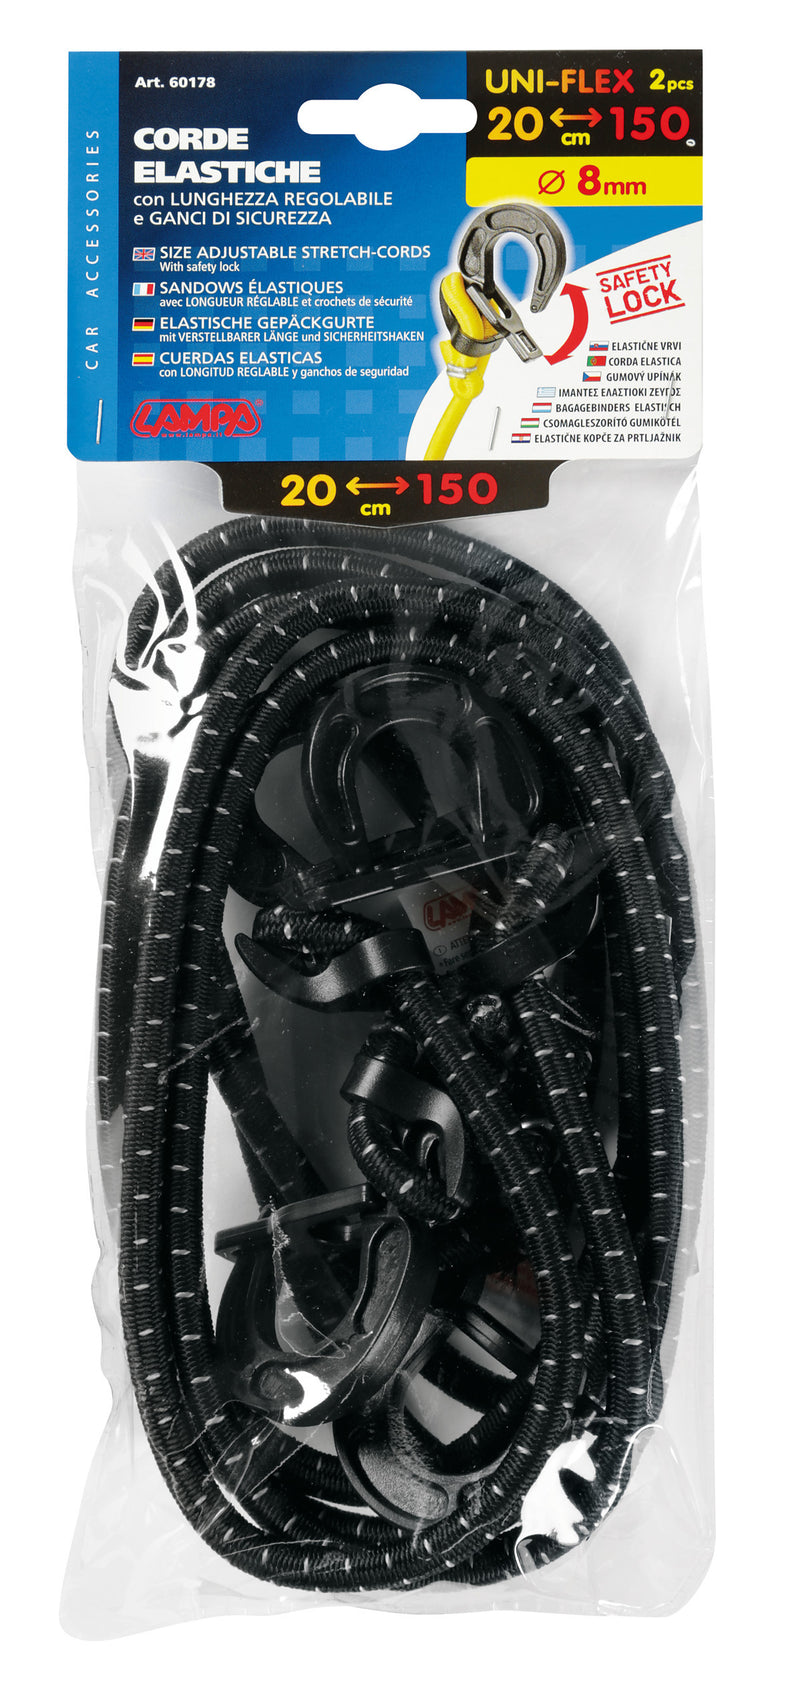 uni-Flex, pair of size adjustable stretch-cords with safety locks